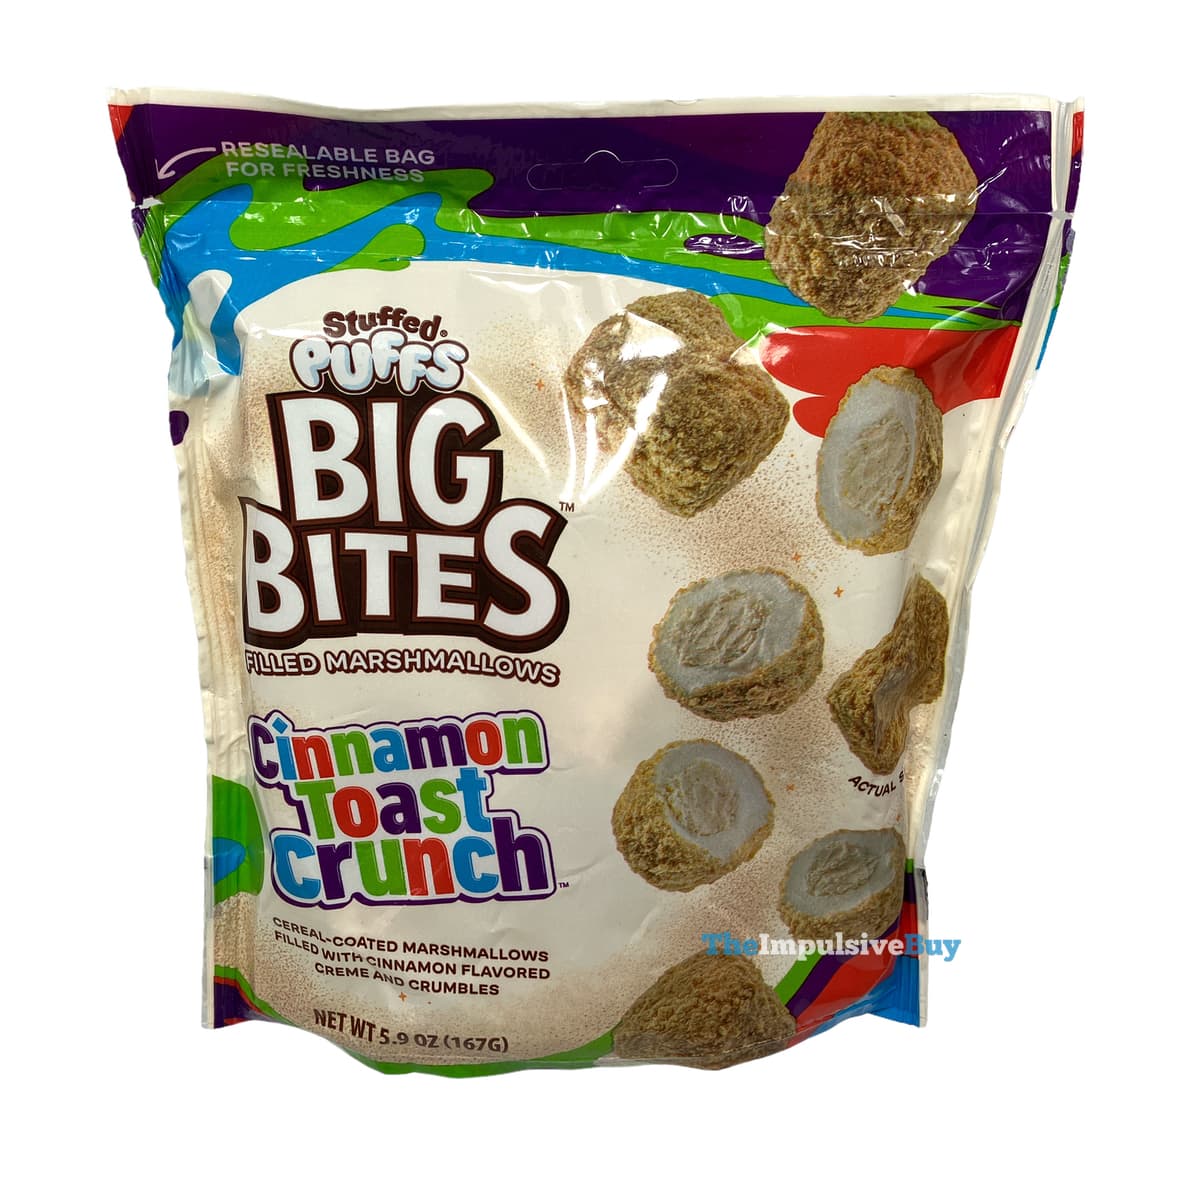 REVIEW: Stuffed Puffs Big Bites Cinnamon Toast Crunch Filled Marshmallows -  The Impulsive Buy